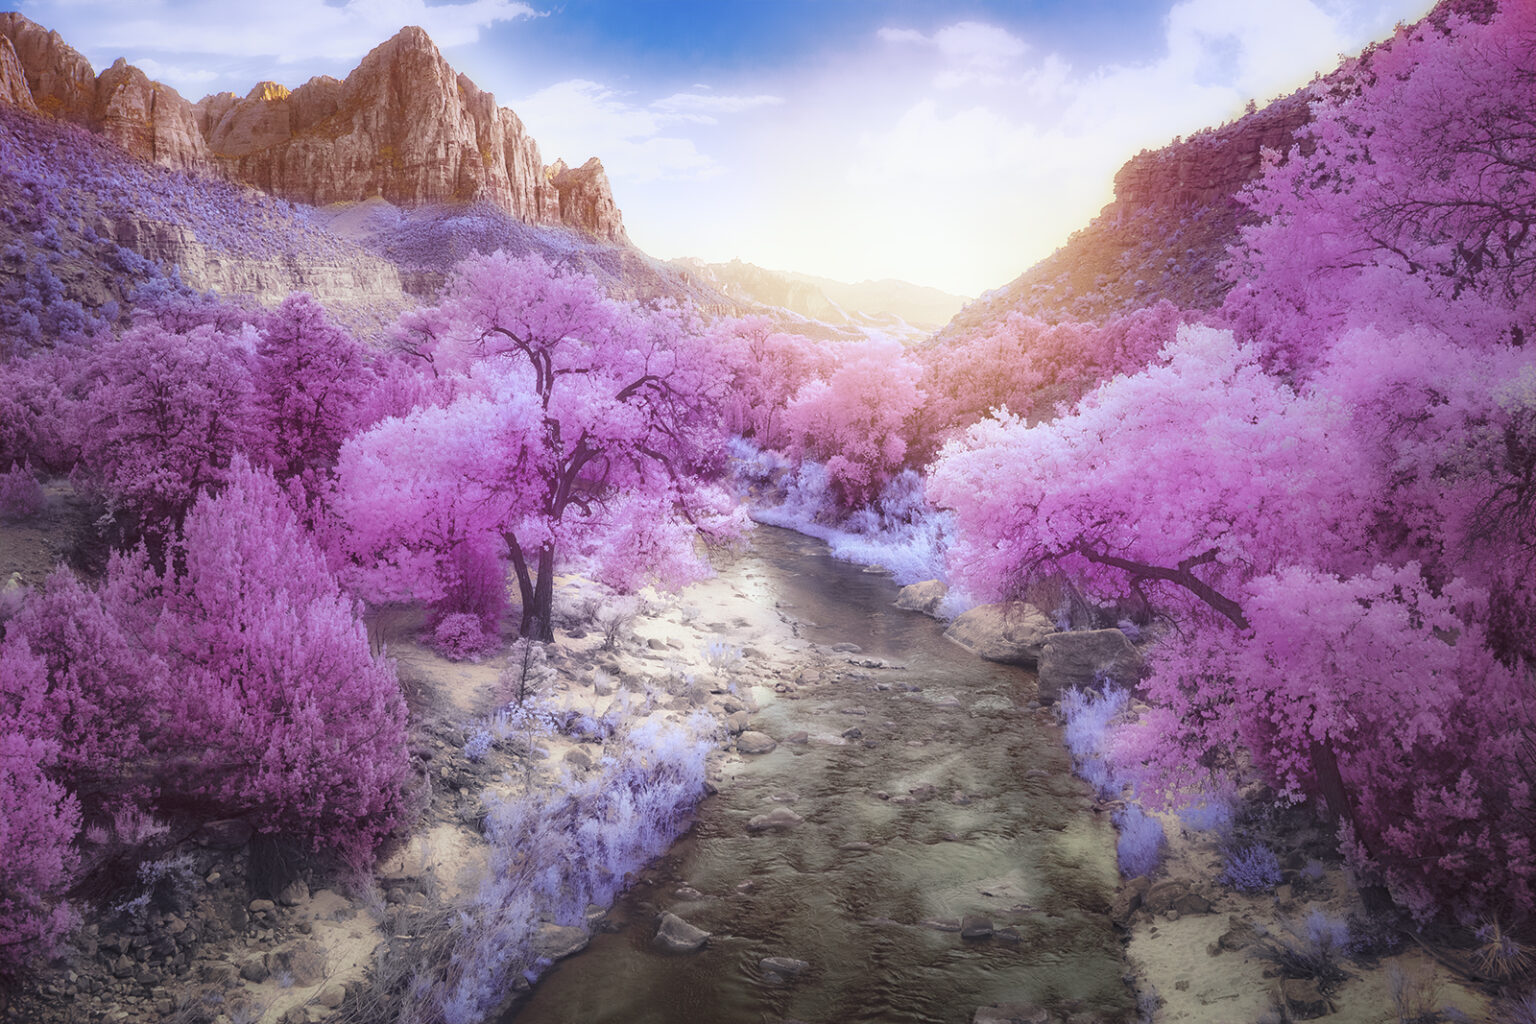 Watchman-from-Canyon-Junction-IR-1536x1024.jpg